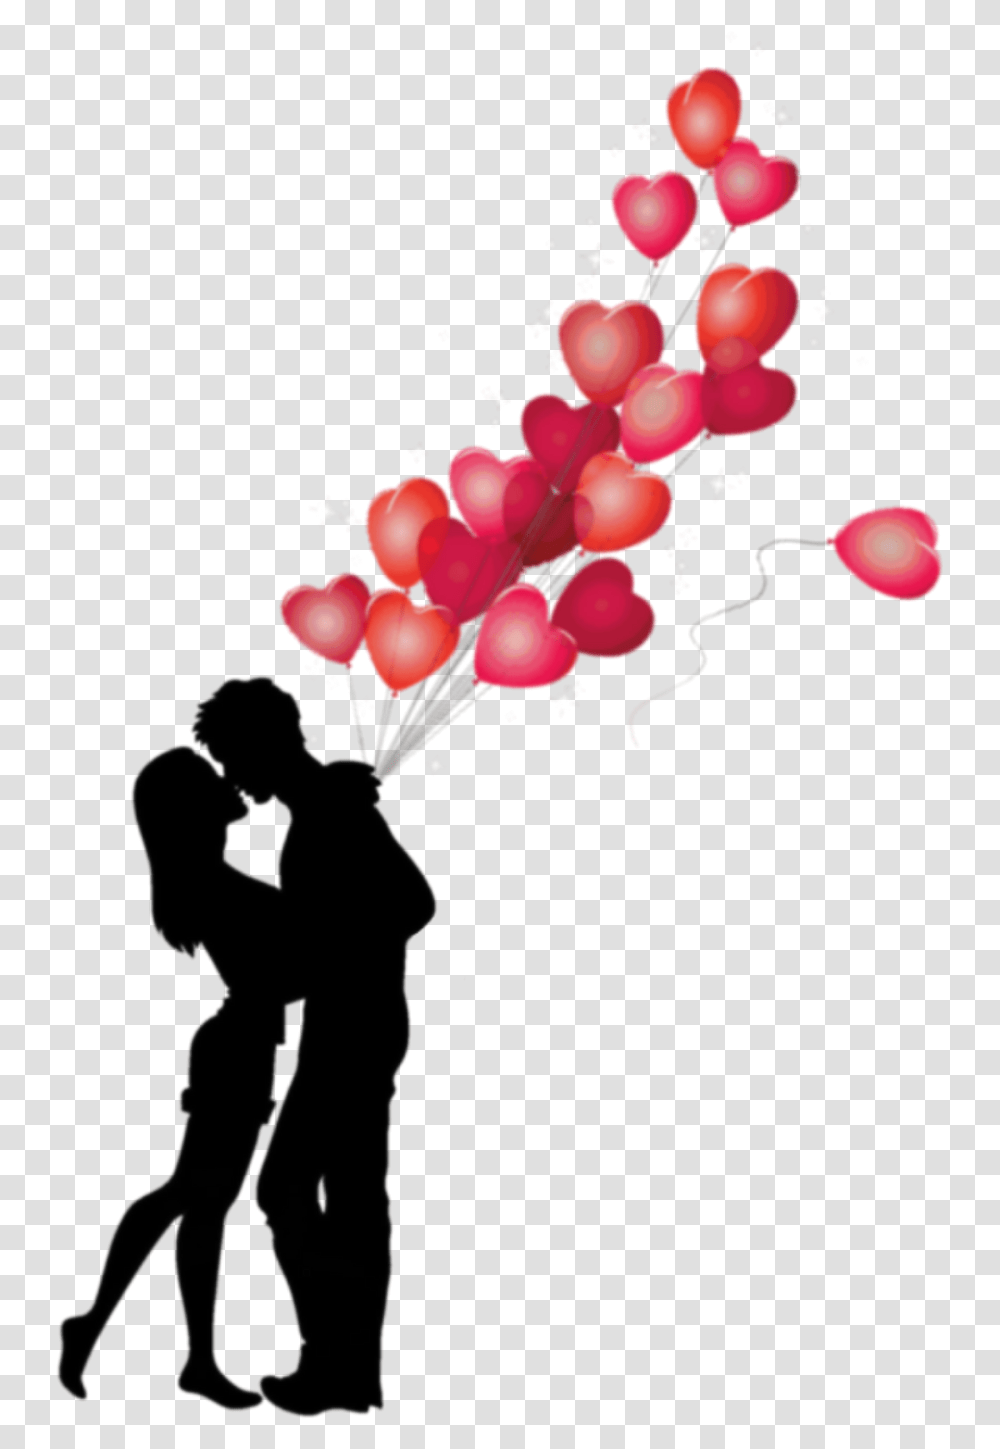 Download Hd Love Hearts Silhouette Valentine Romantic Love Images Hd, Balloon, Plant, Person, Human Transparent Png